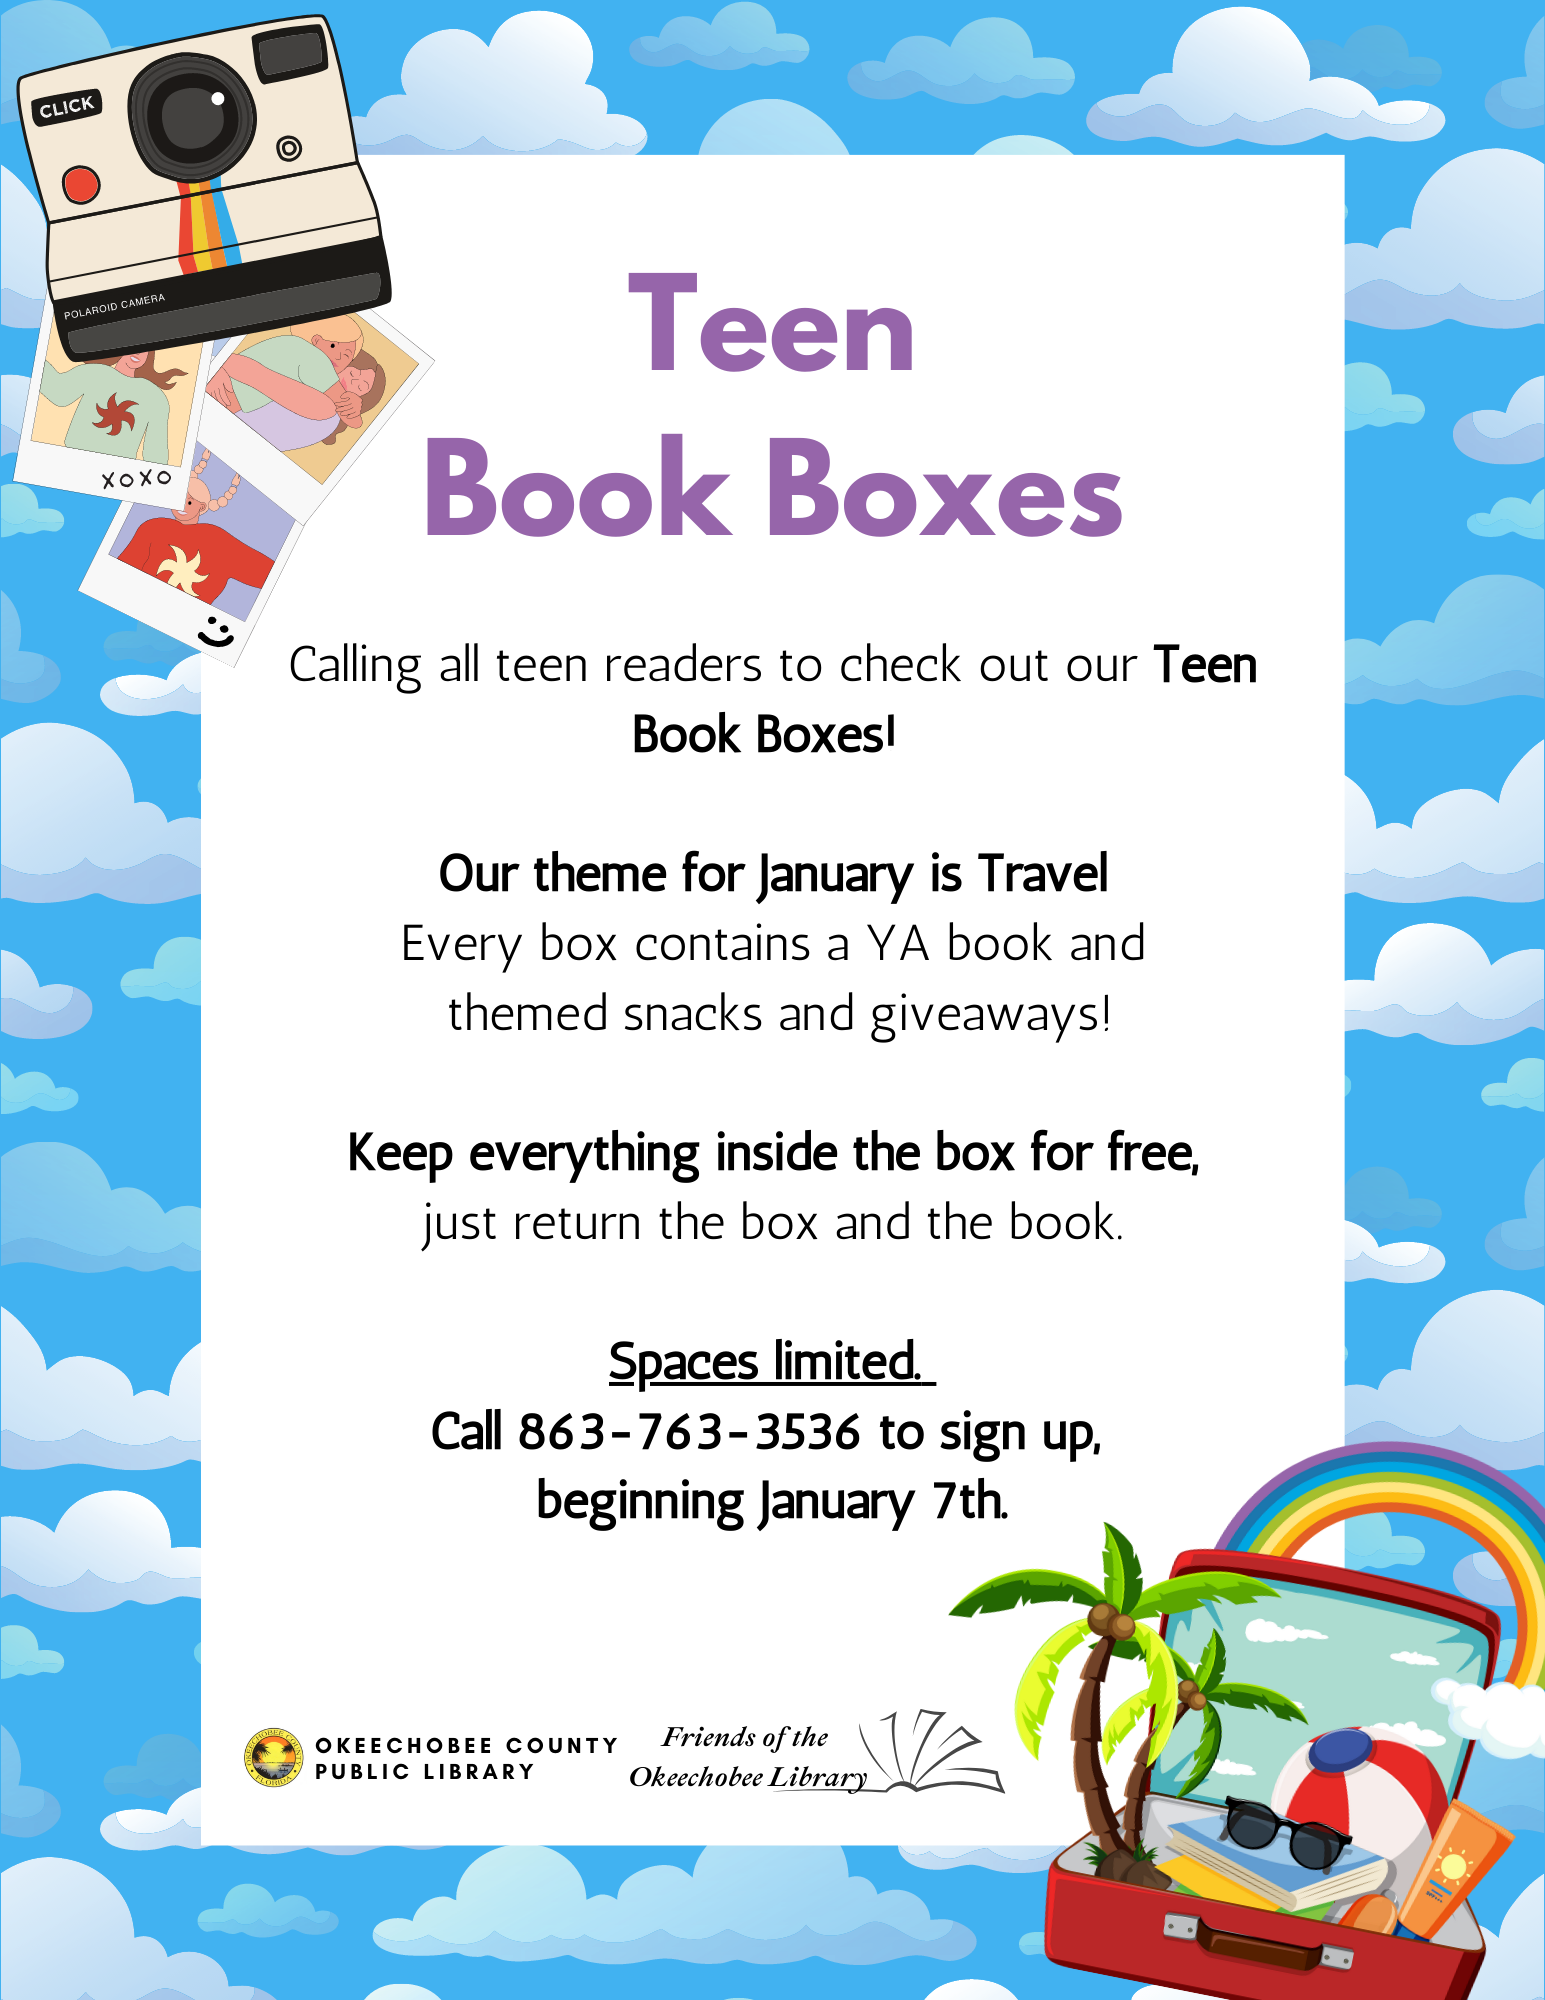  January Teen Book Boxes! Open to all teens, get free prizes and snacks just for checking out a book!"